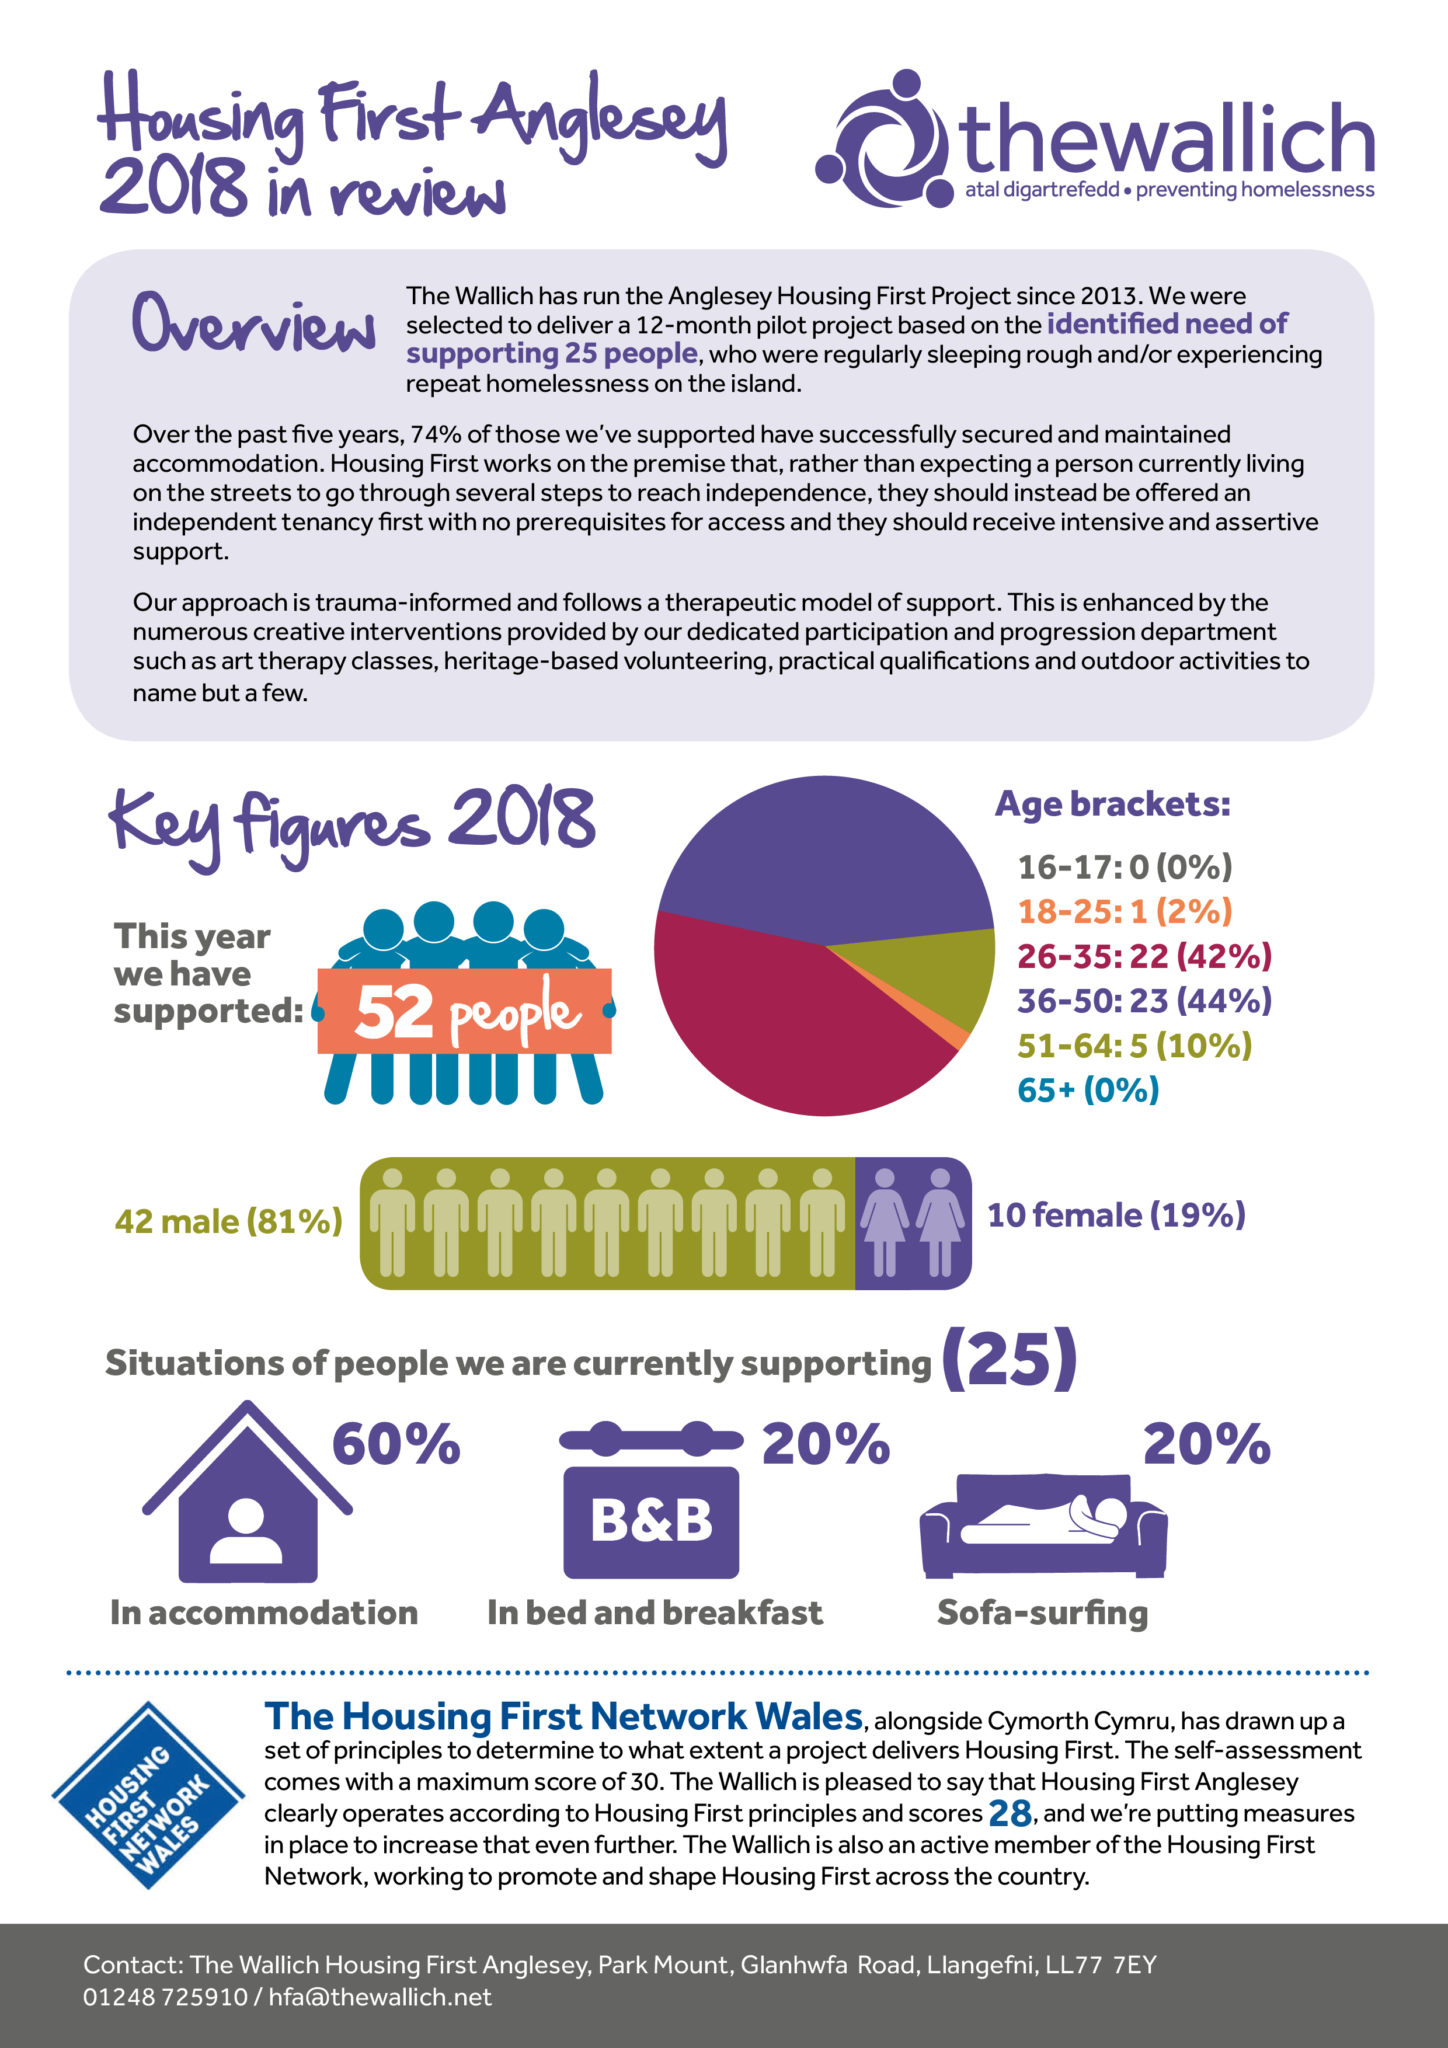 Housing First Anglesey 2018 Report - Homelessness Wales - The Wallich Charity